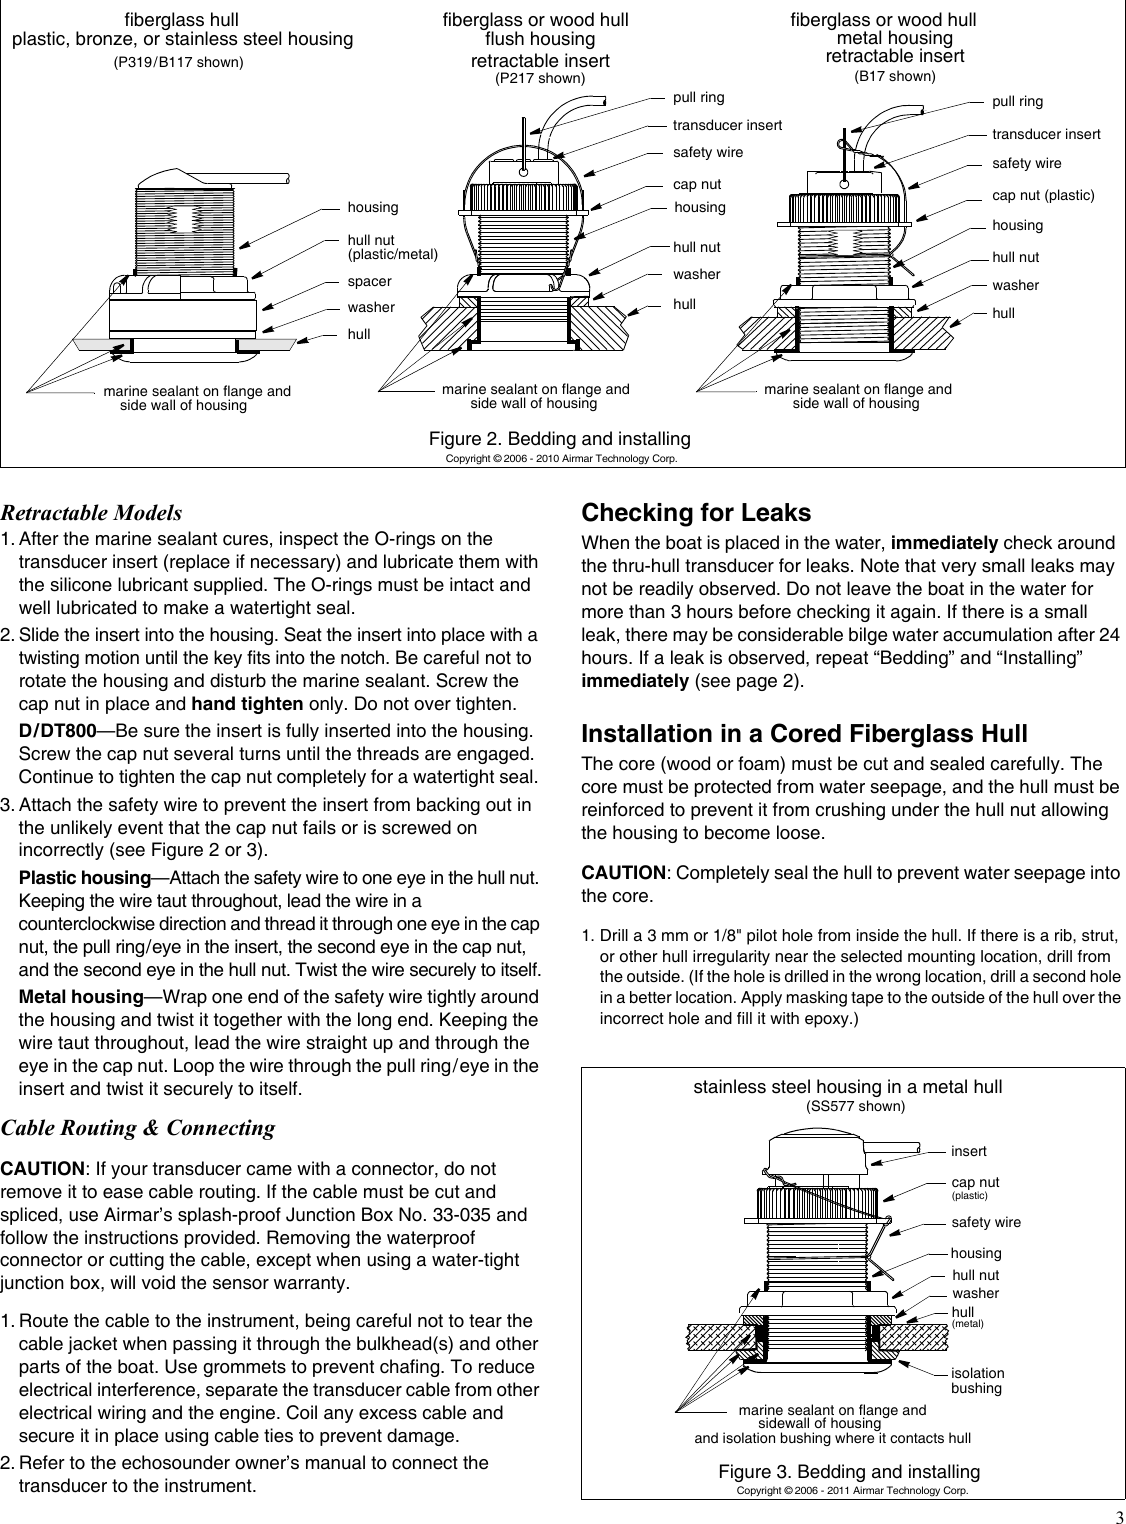 Page 3 of 4 - Furuno Furuno-235Dht-Mse-Installation-Instructions- 17-006-01-rev11_TH_Flush  Furuno-235dht-mse-installation-instructions